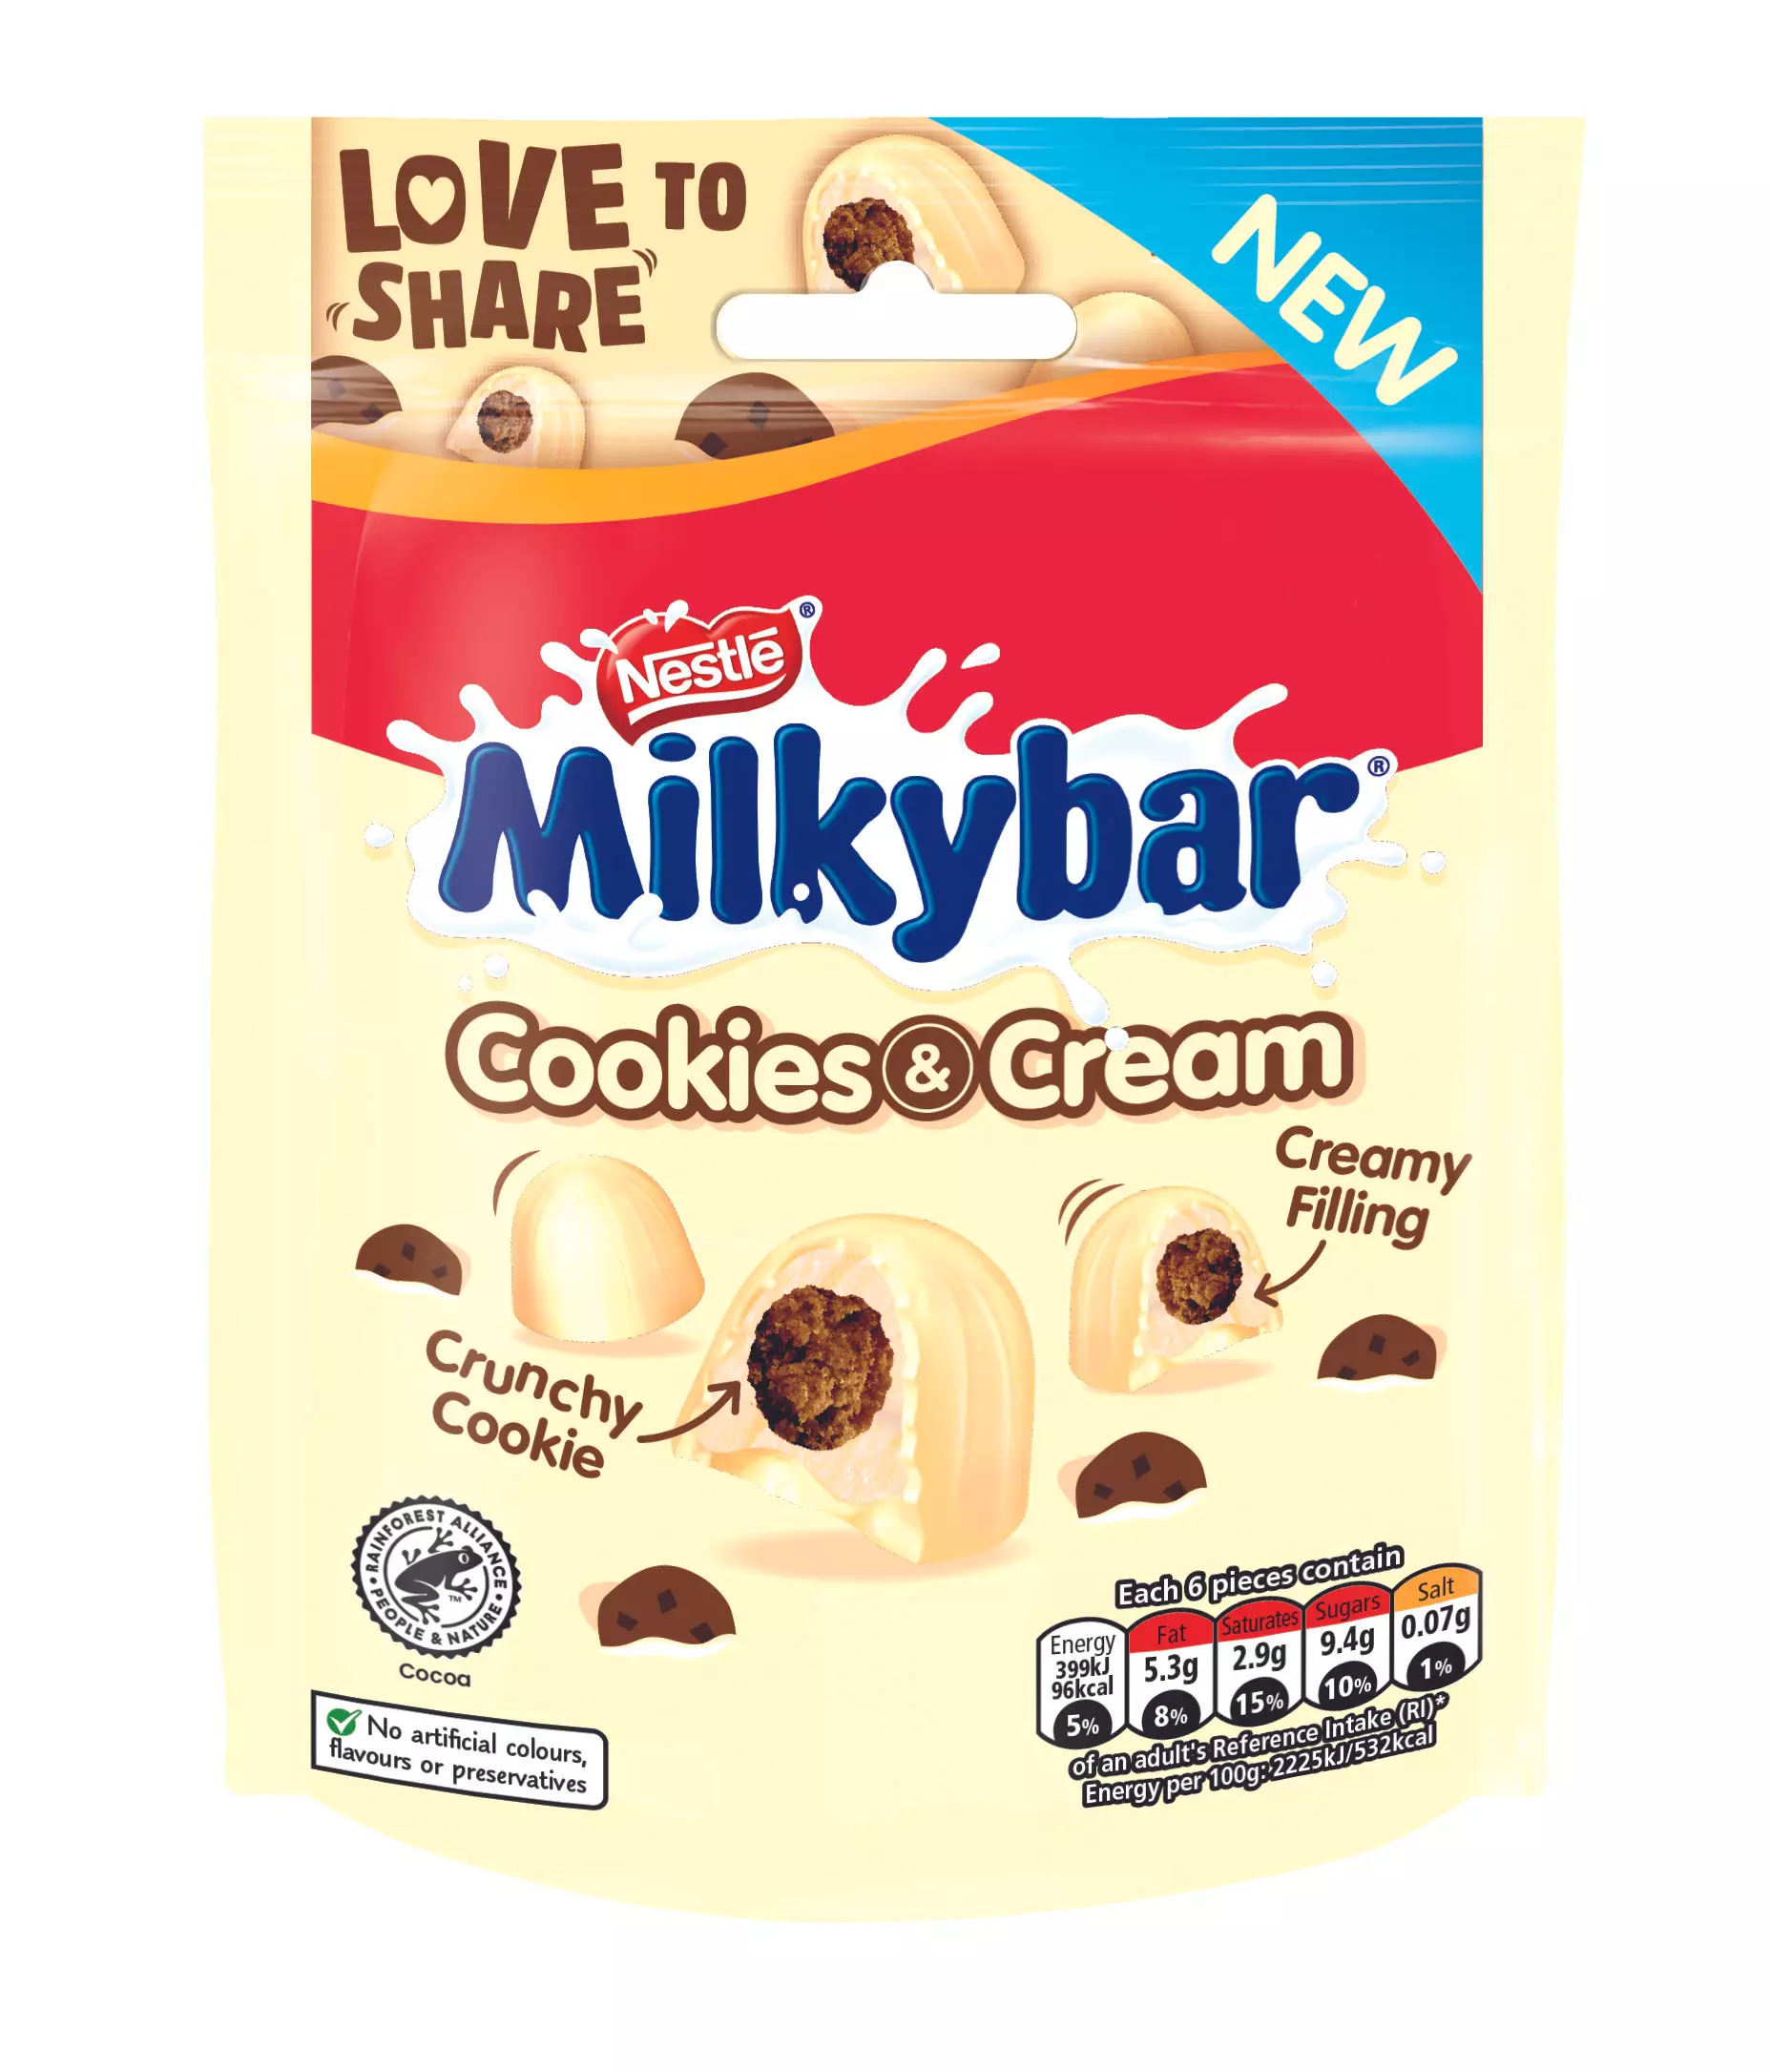 You can now get a bag of Milkybar Cookies and Cream (